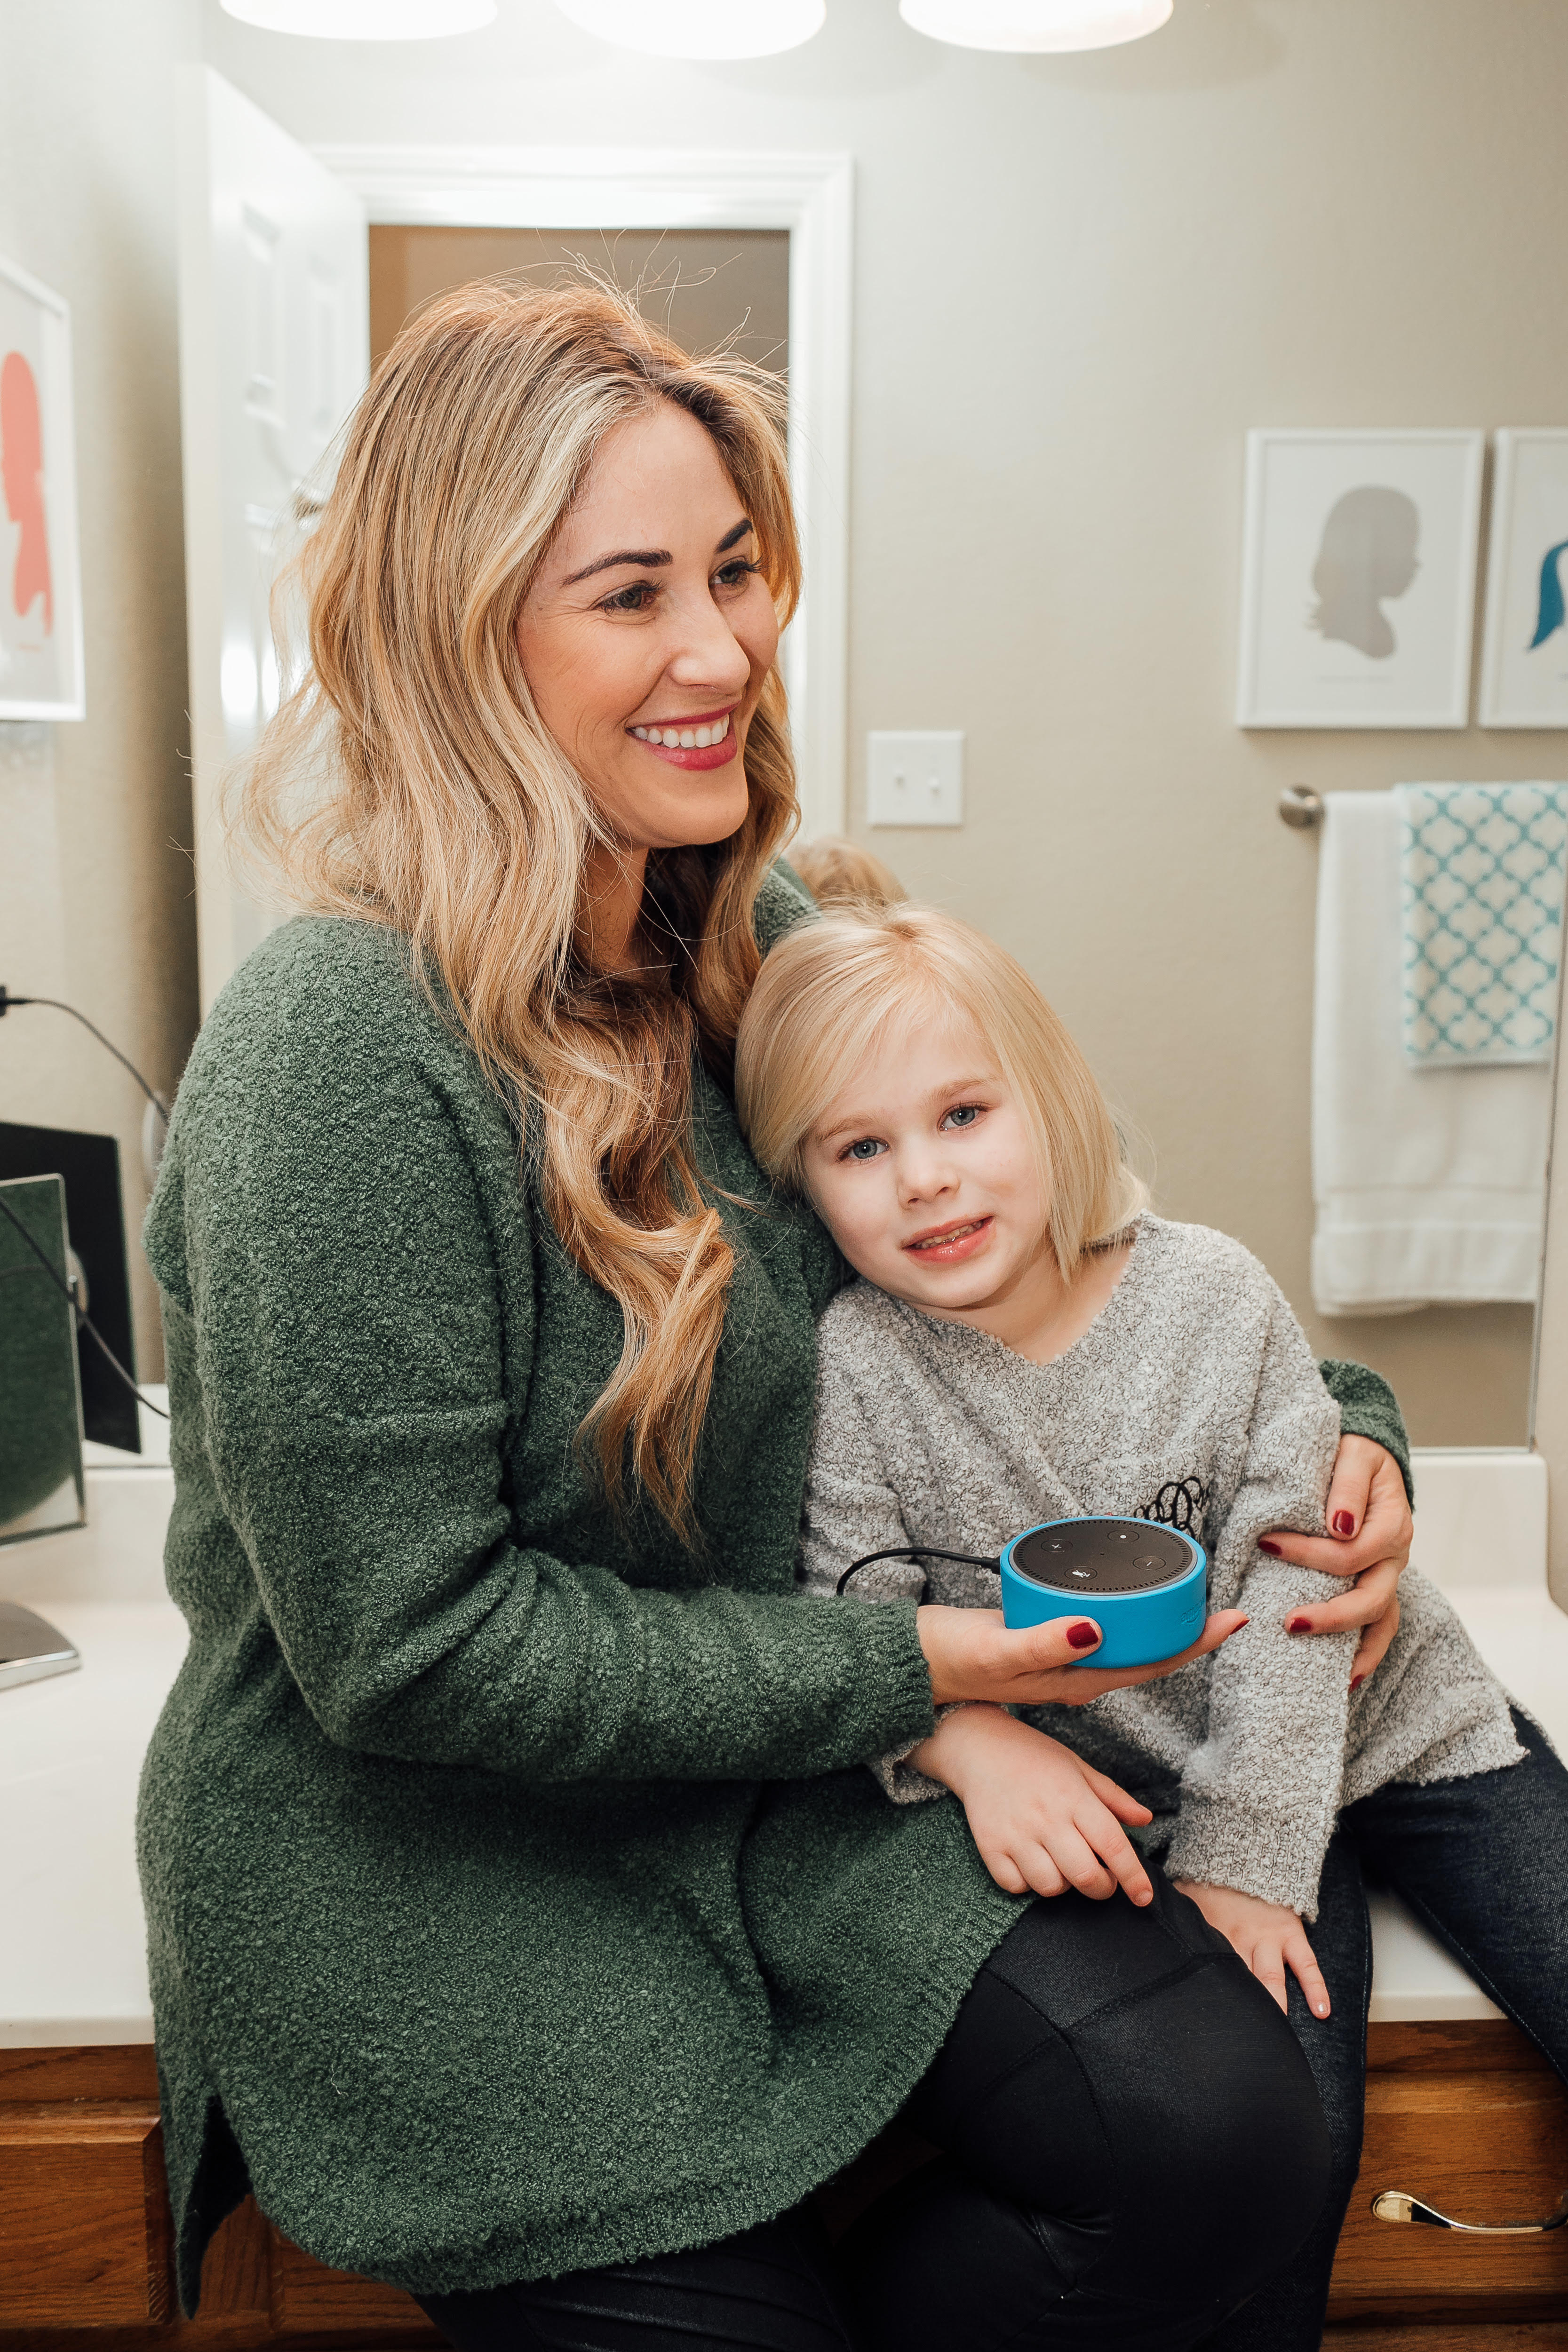 How to Use Amazon Alexa featured by top US lifestyle blog Walking in Memphis in High Heels; Image of a mother with her daughter smiling.